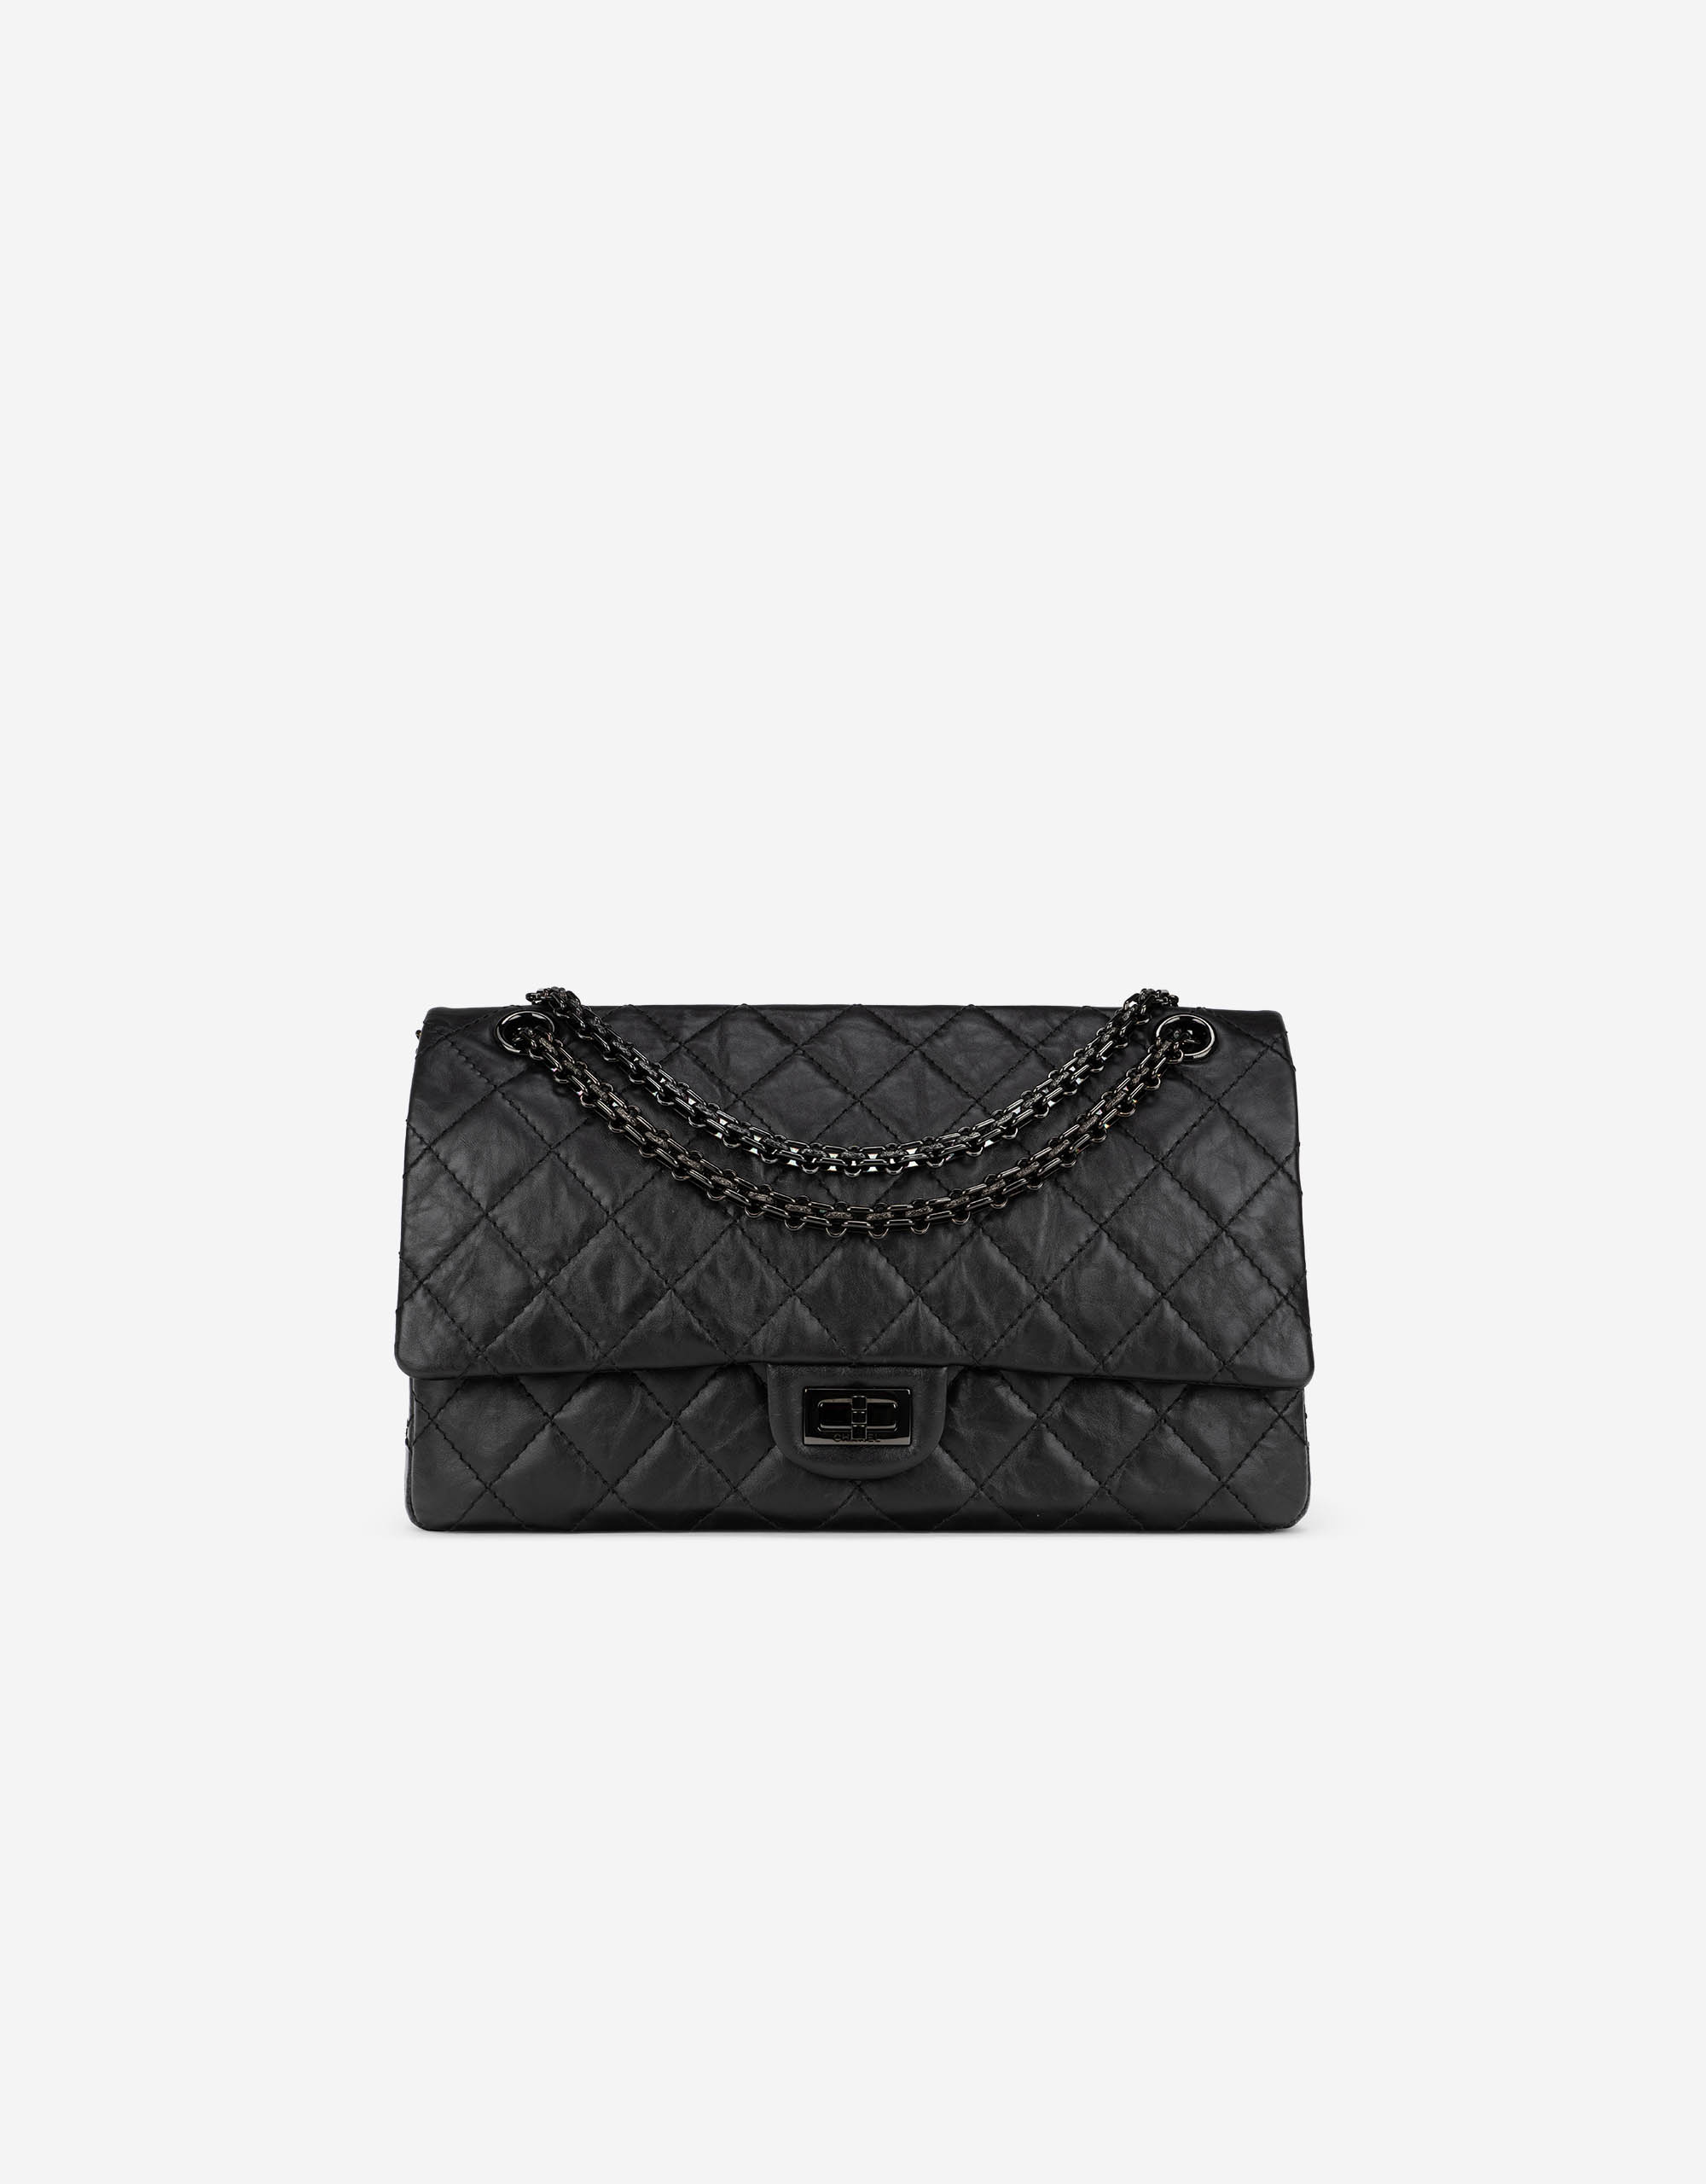 Chanel Reissue 226 19K So Black Quilted Calfskin with shiny black hardware